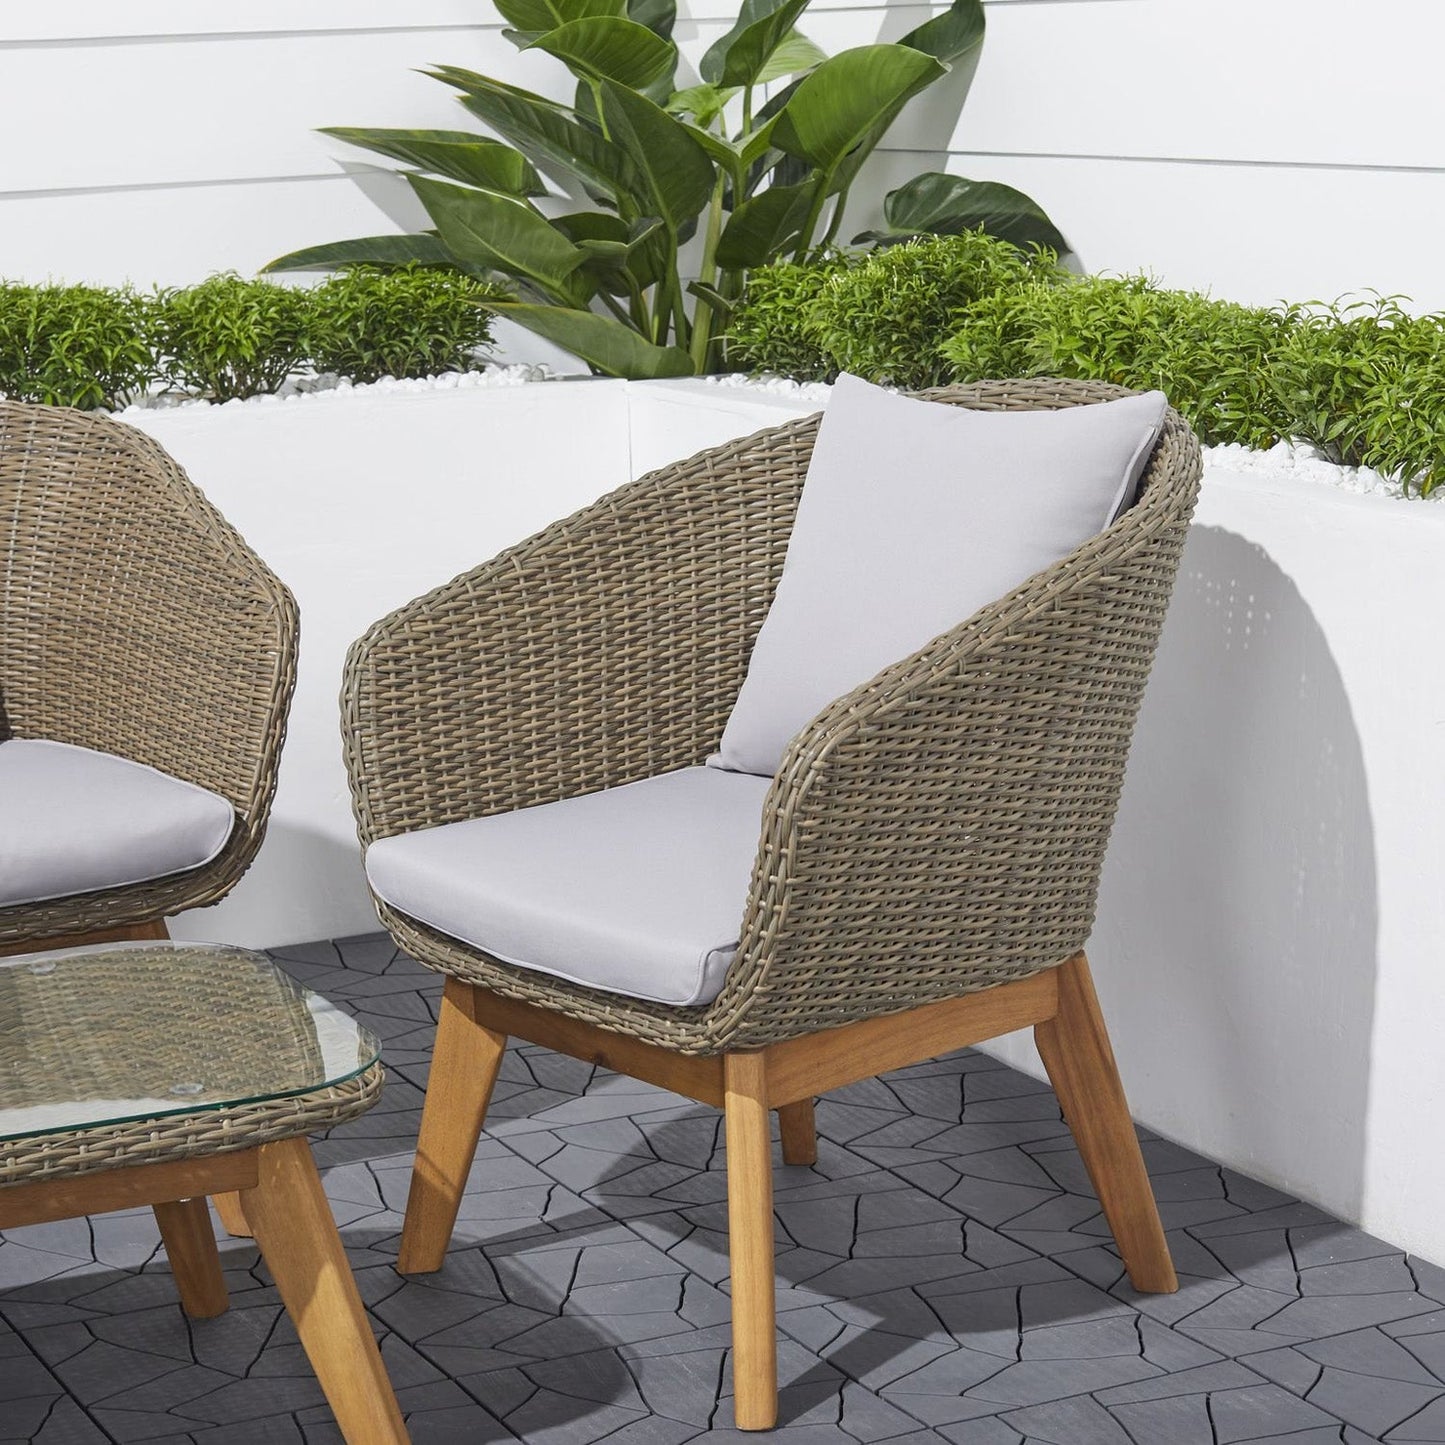 Vifah Grayton 4-piece Rustic All-Weather Patio Wood and Wicker